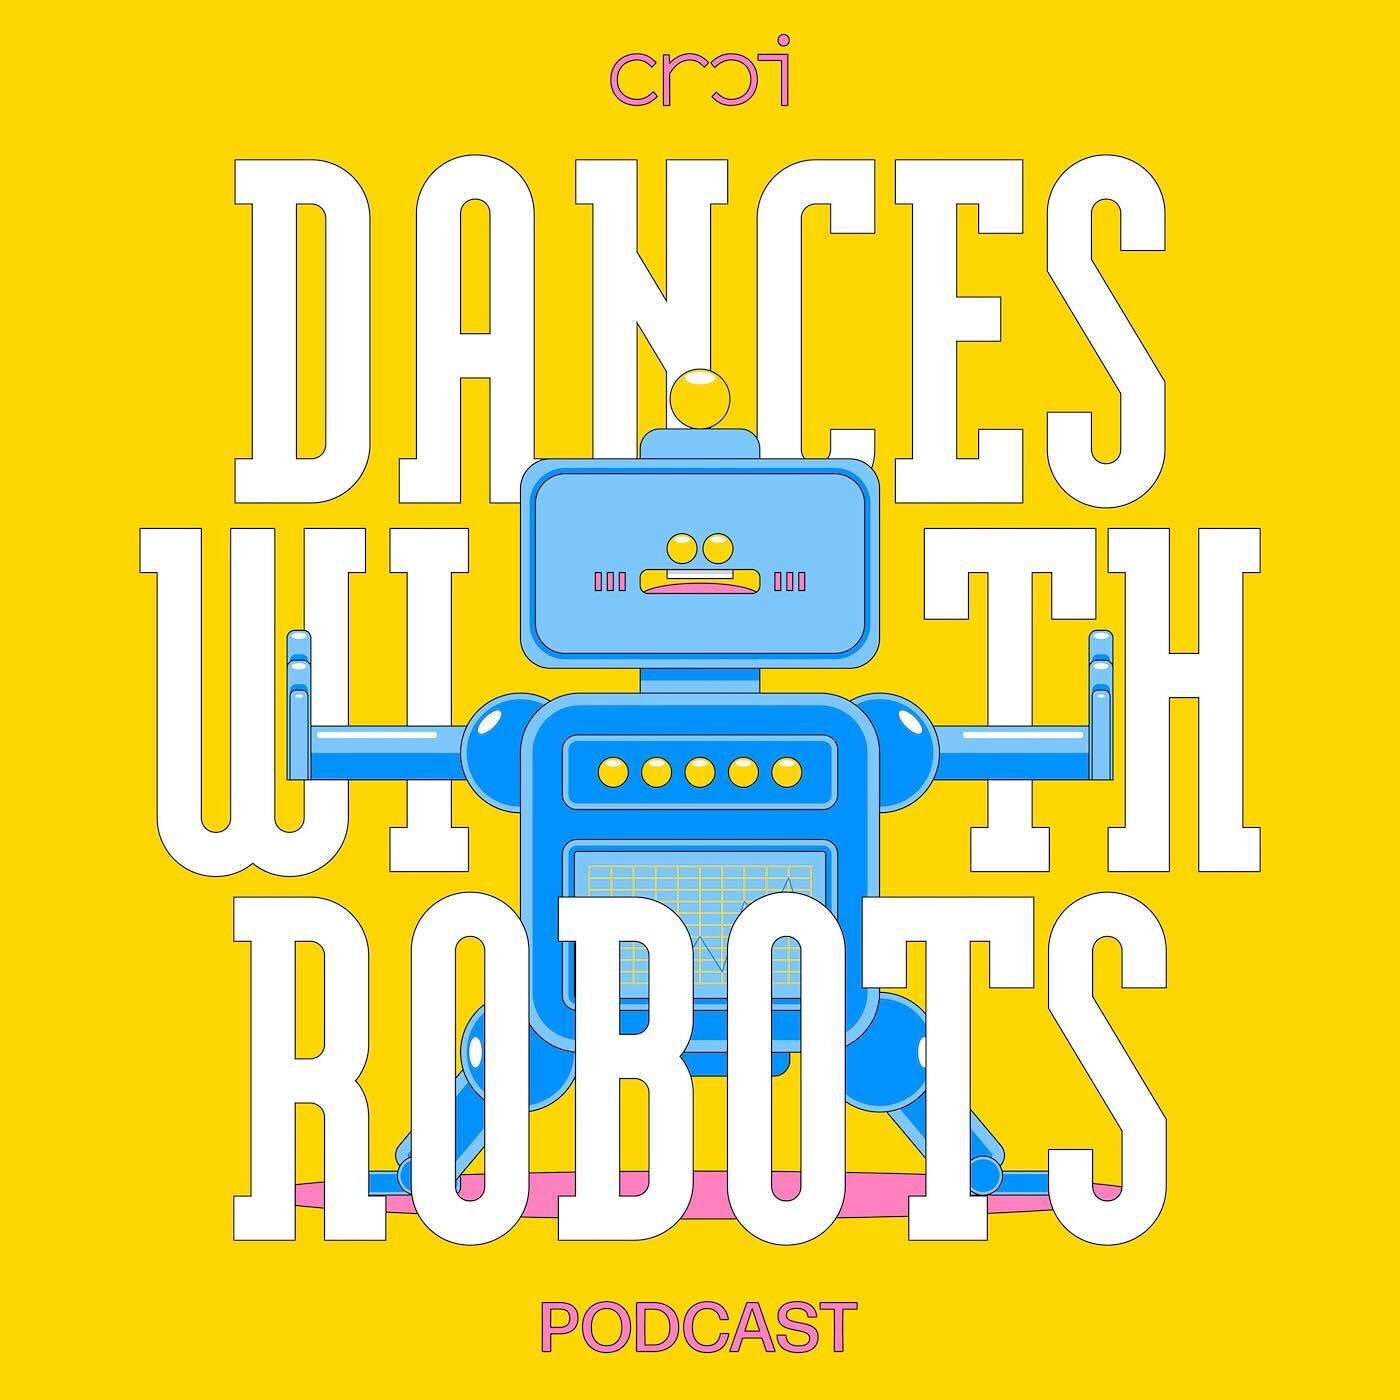 🎧️It may not be the most polished (or professional) presentation I&rsquo;ve ever done, but this conversation with @sydneyskybetter for his fantastic new podcast &ldquo;Dances with Robots&rdquo; was a lot of fun. (I recommend playing my too long-wind